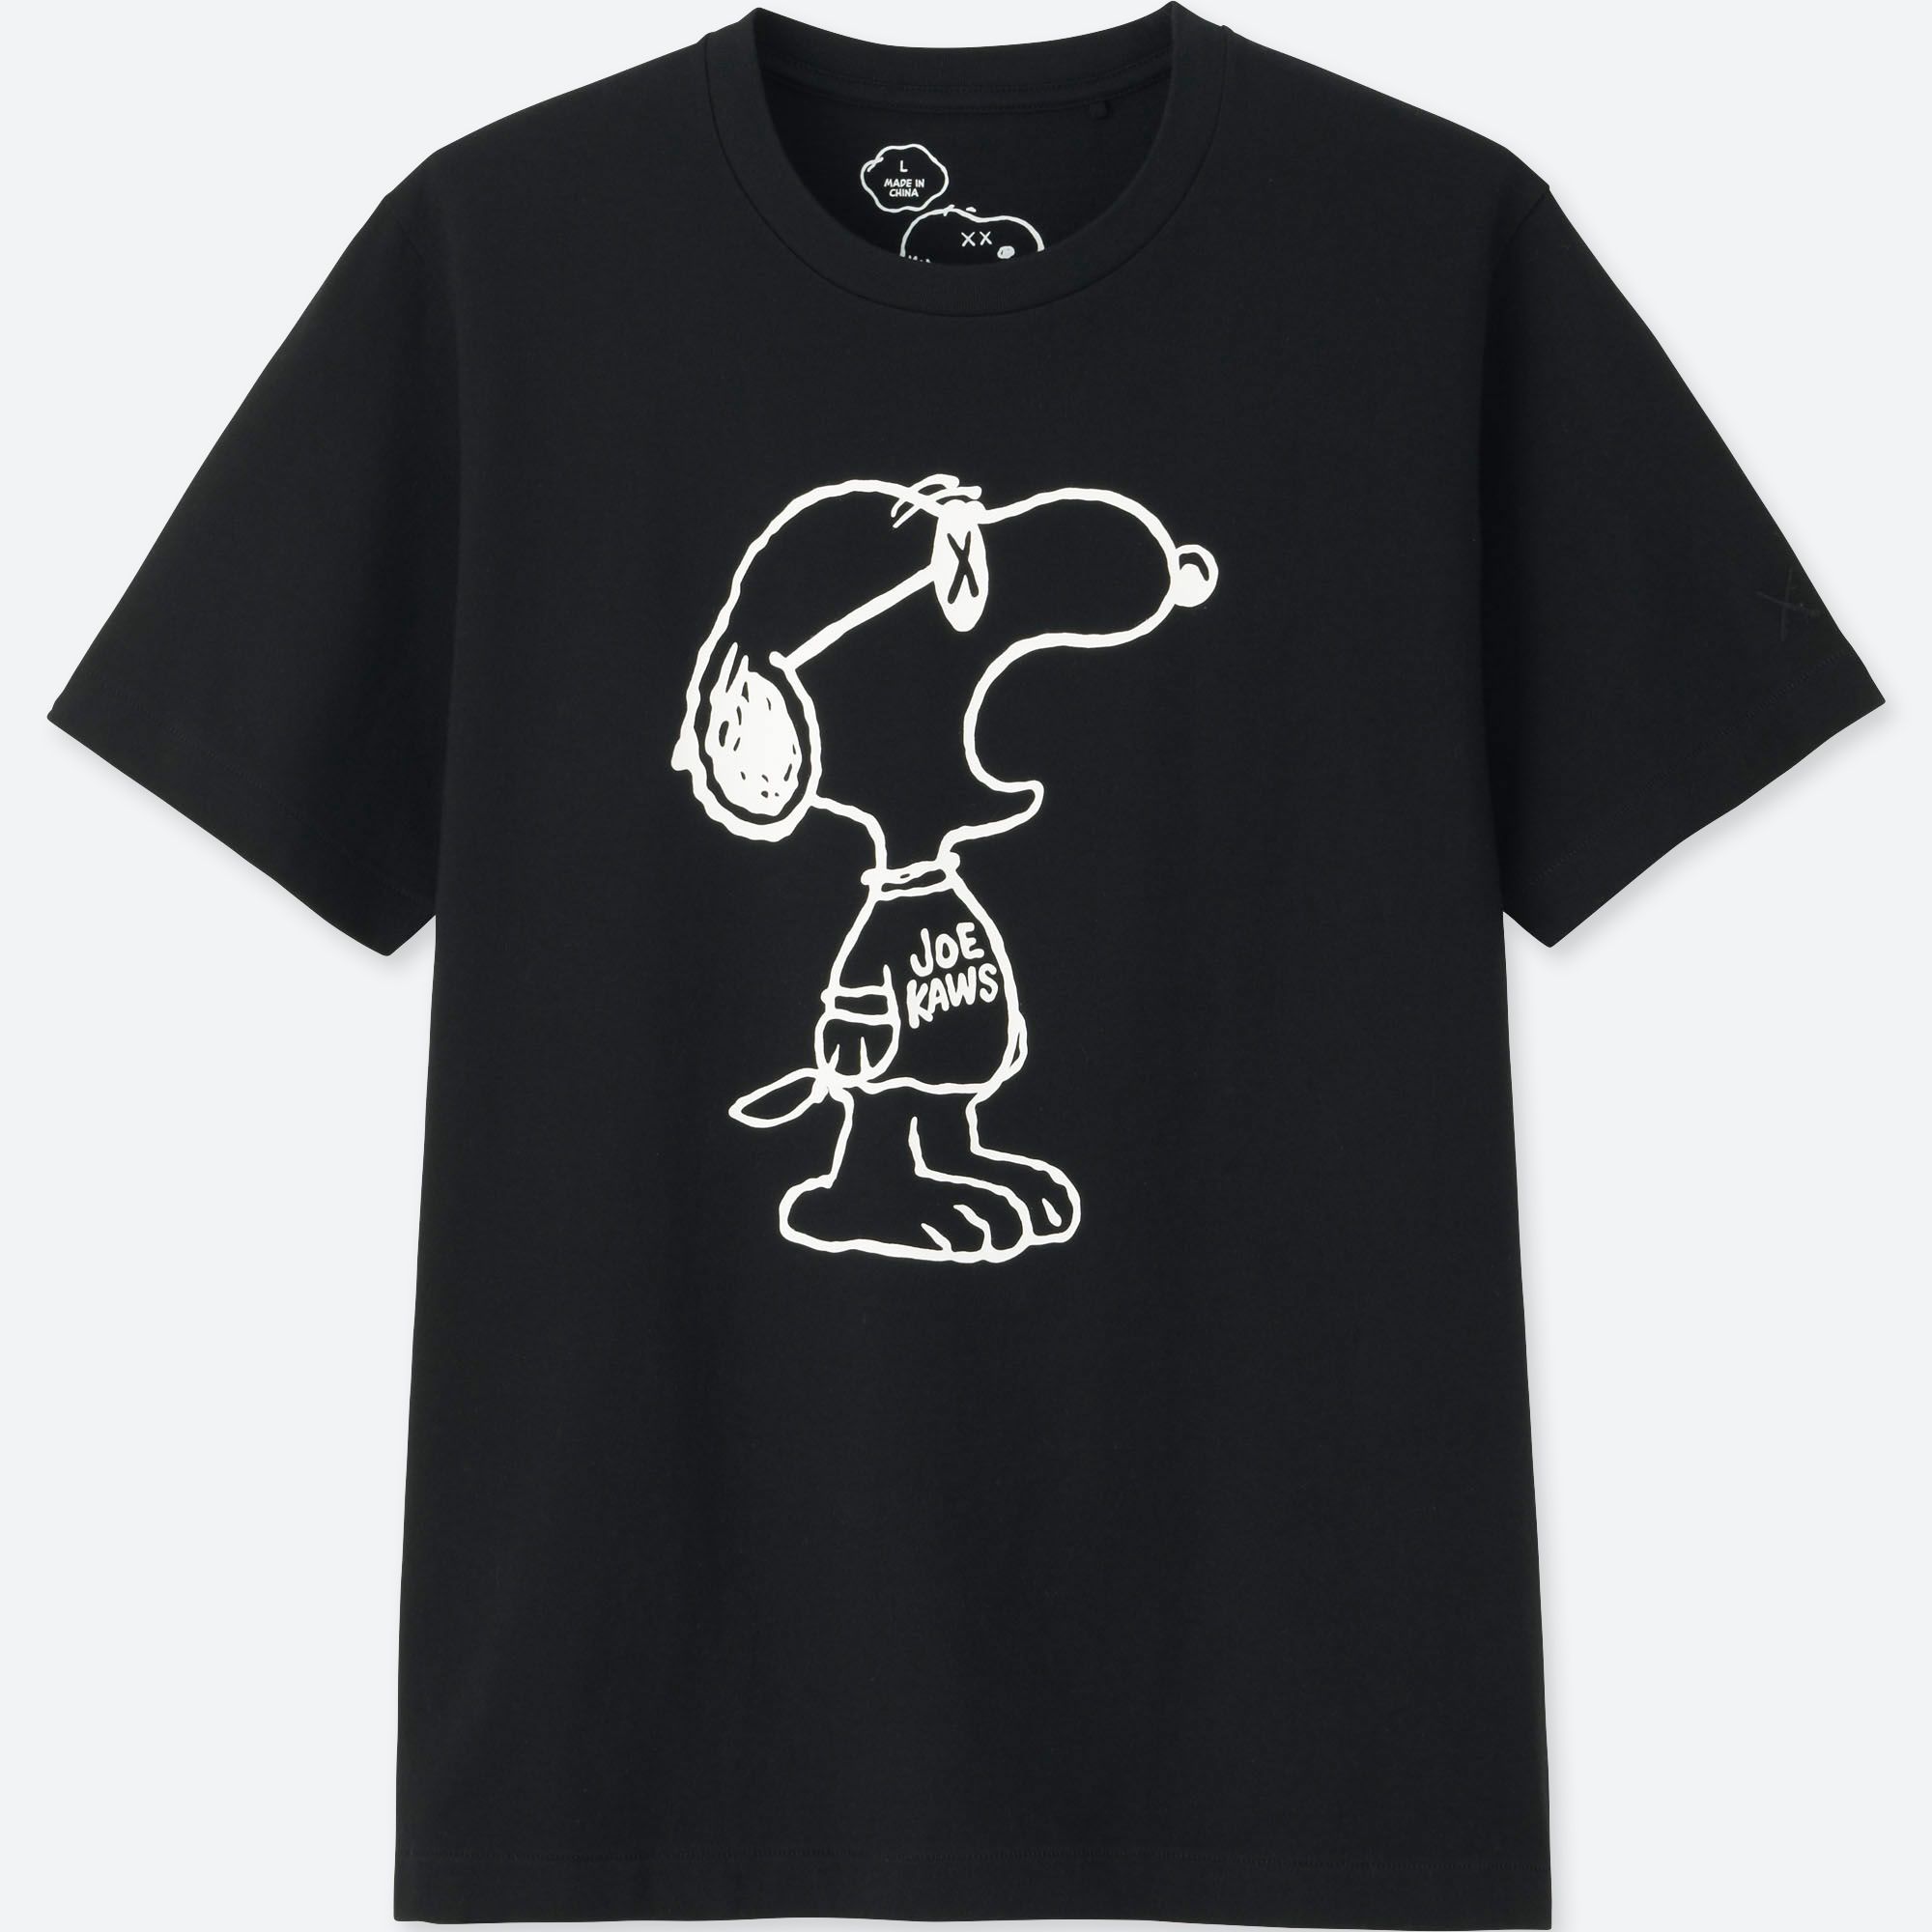 Carry Snoopy with You Wherever You Go with UNIQLO's Kaws x Peanuts Items